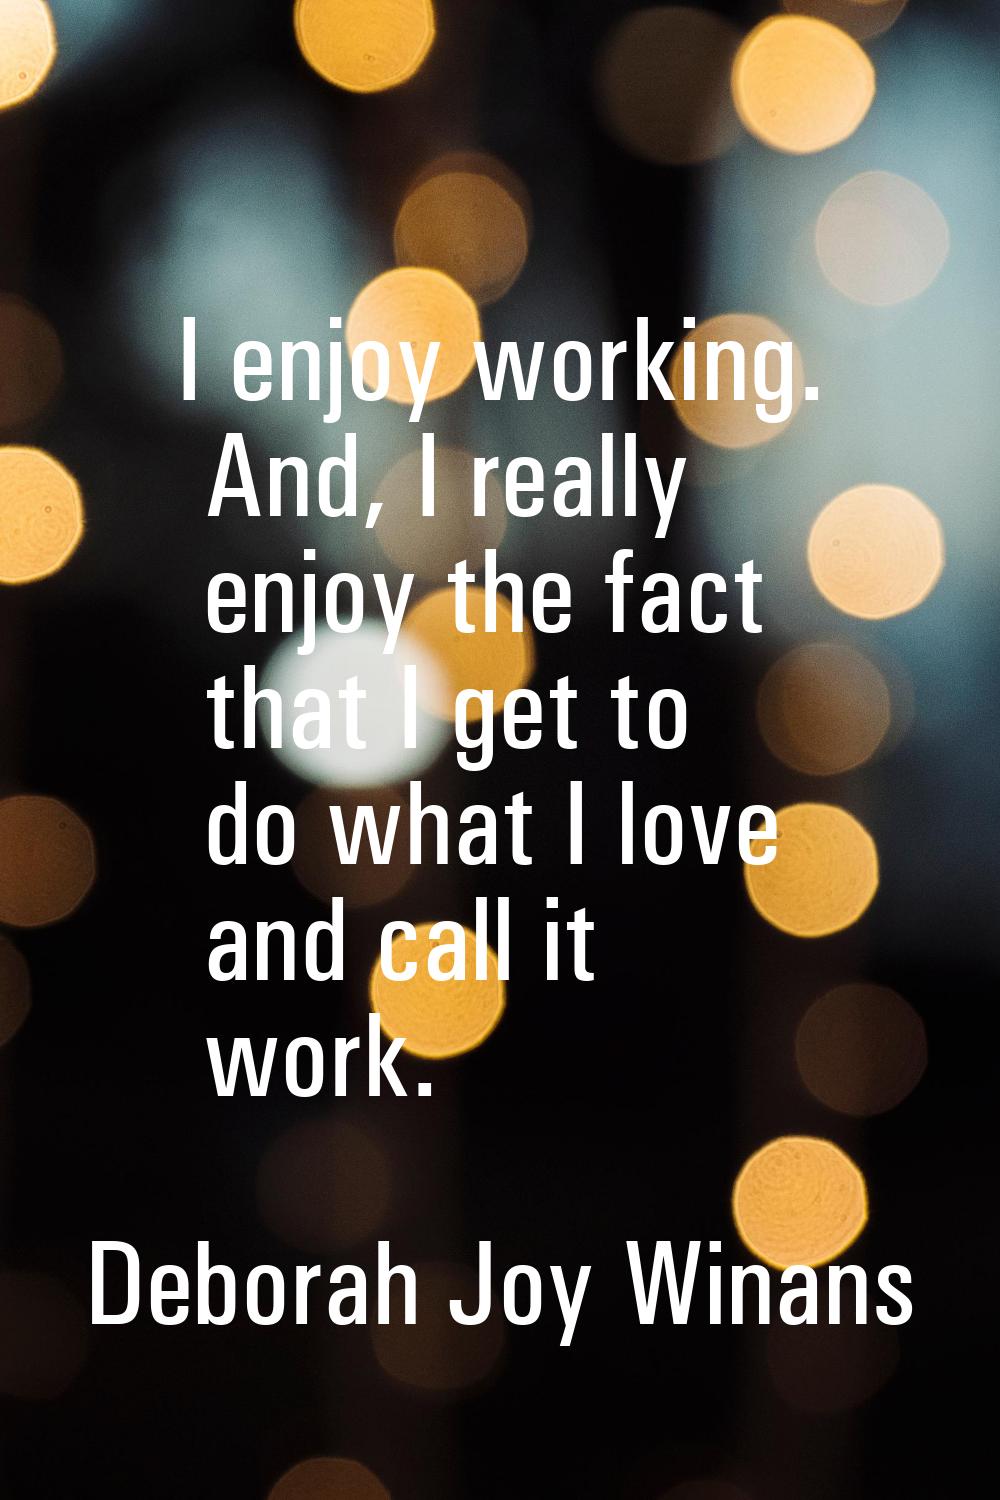 I enjoy working. And, I really enjoy the fact that I get to do what I love and call it work.